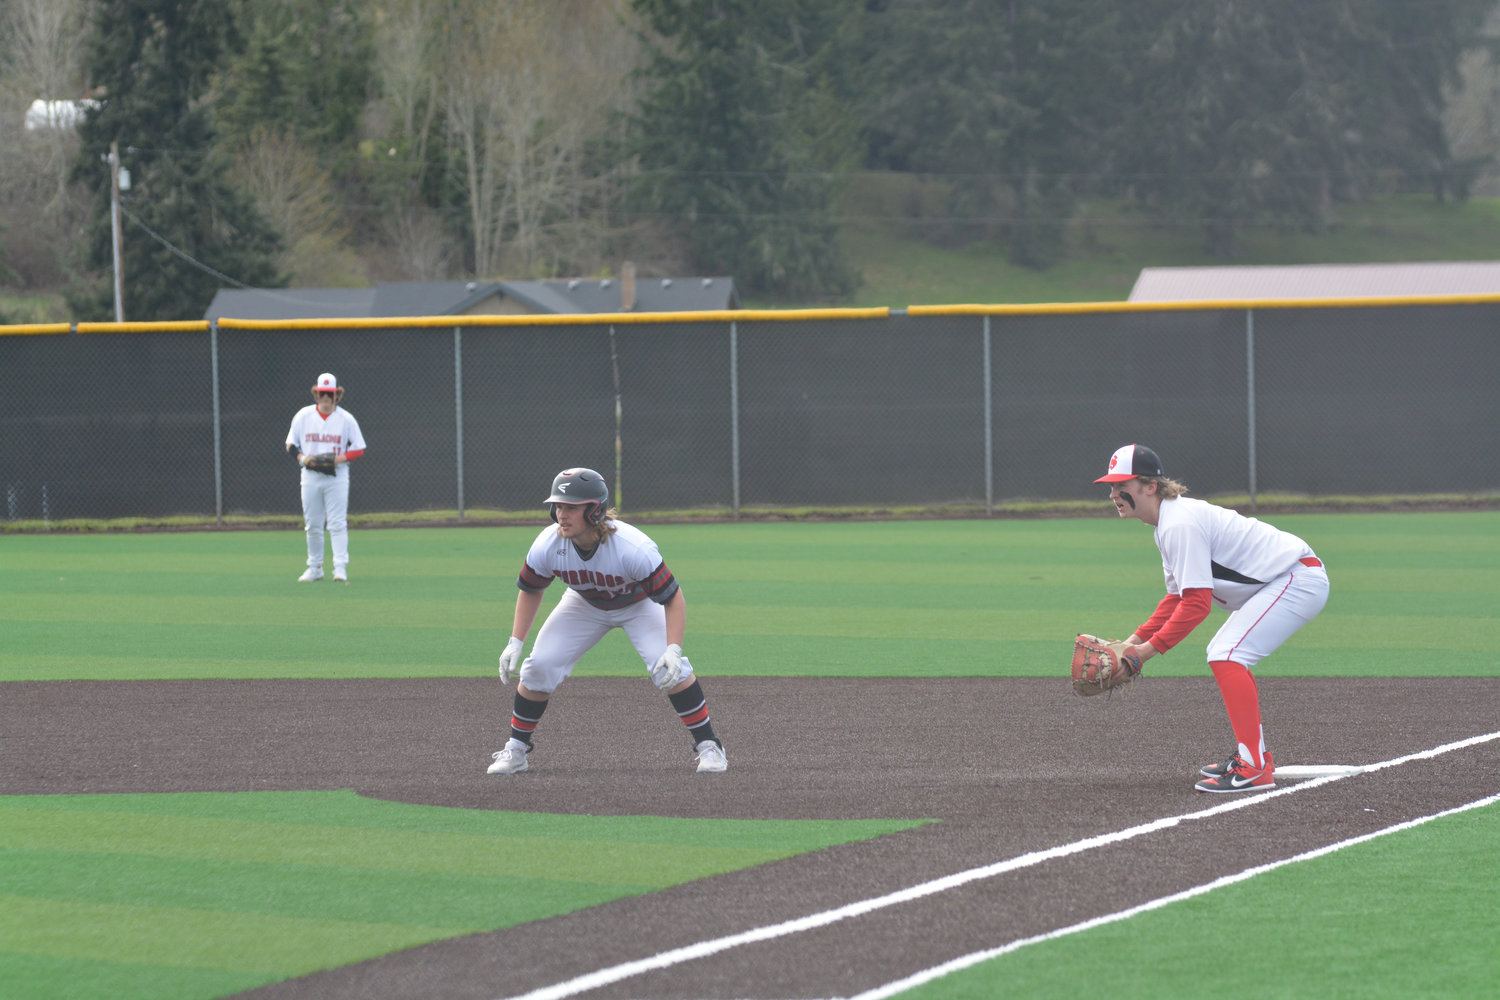 Senior first baseman Jeremy Reimers takes a lead after a base hit on April 1 in a game against Steilacoom.